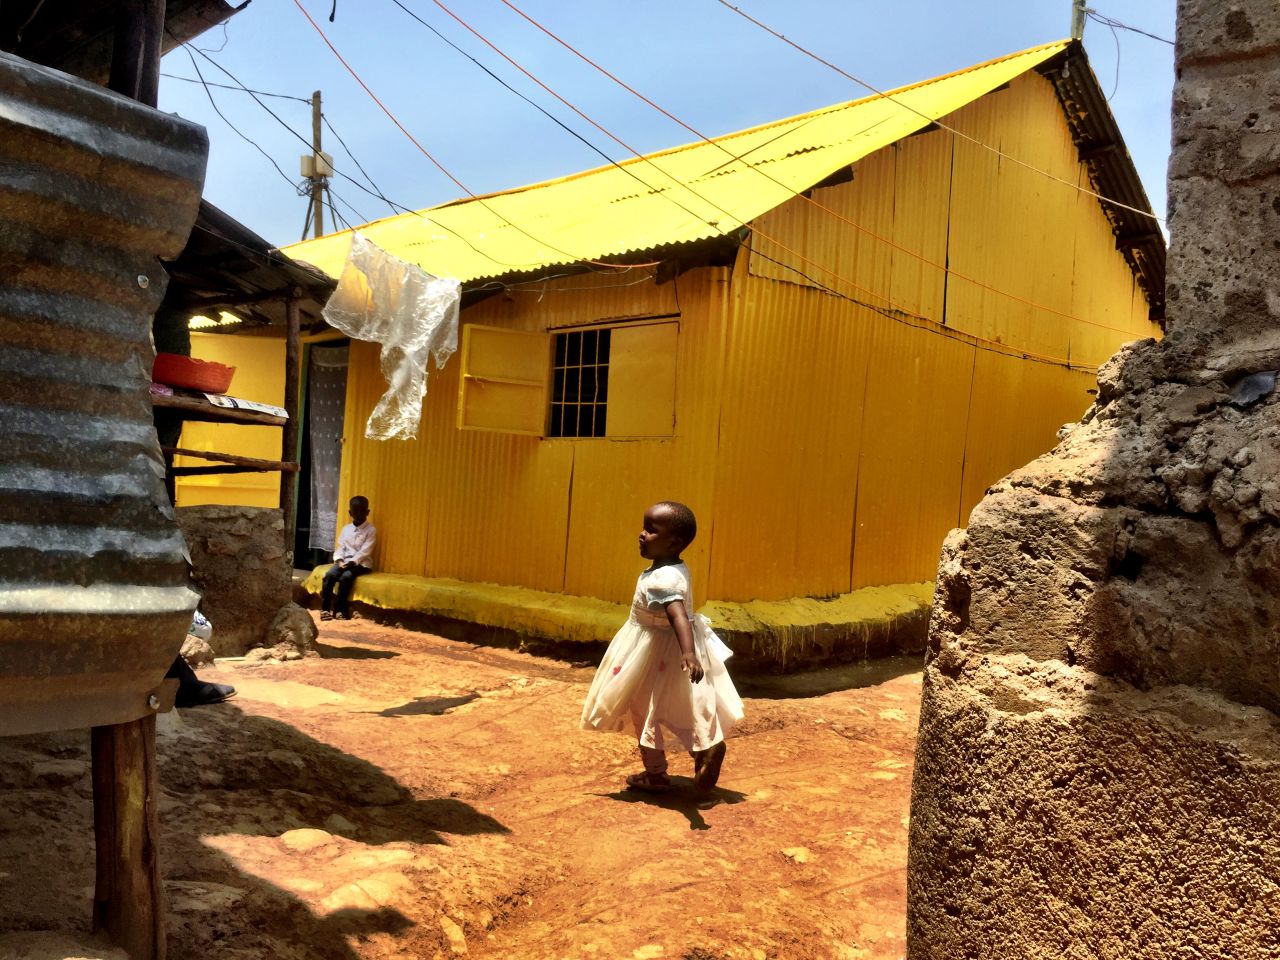 Just nine places of worship have been painted across Kenya, but plans are underway for forty more mosques and churches to be painted. 